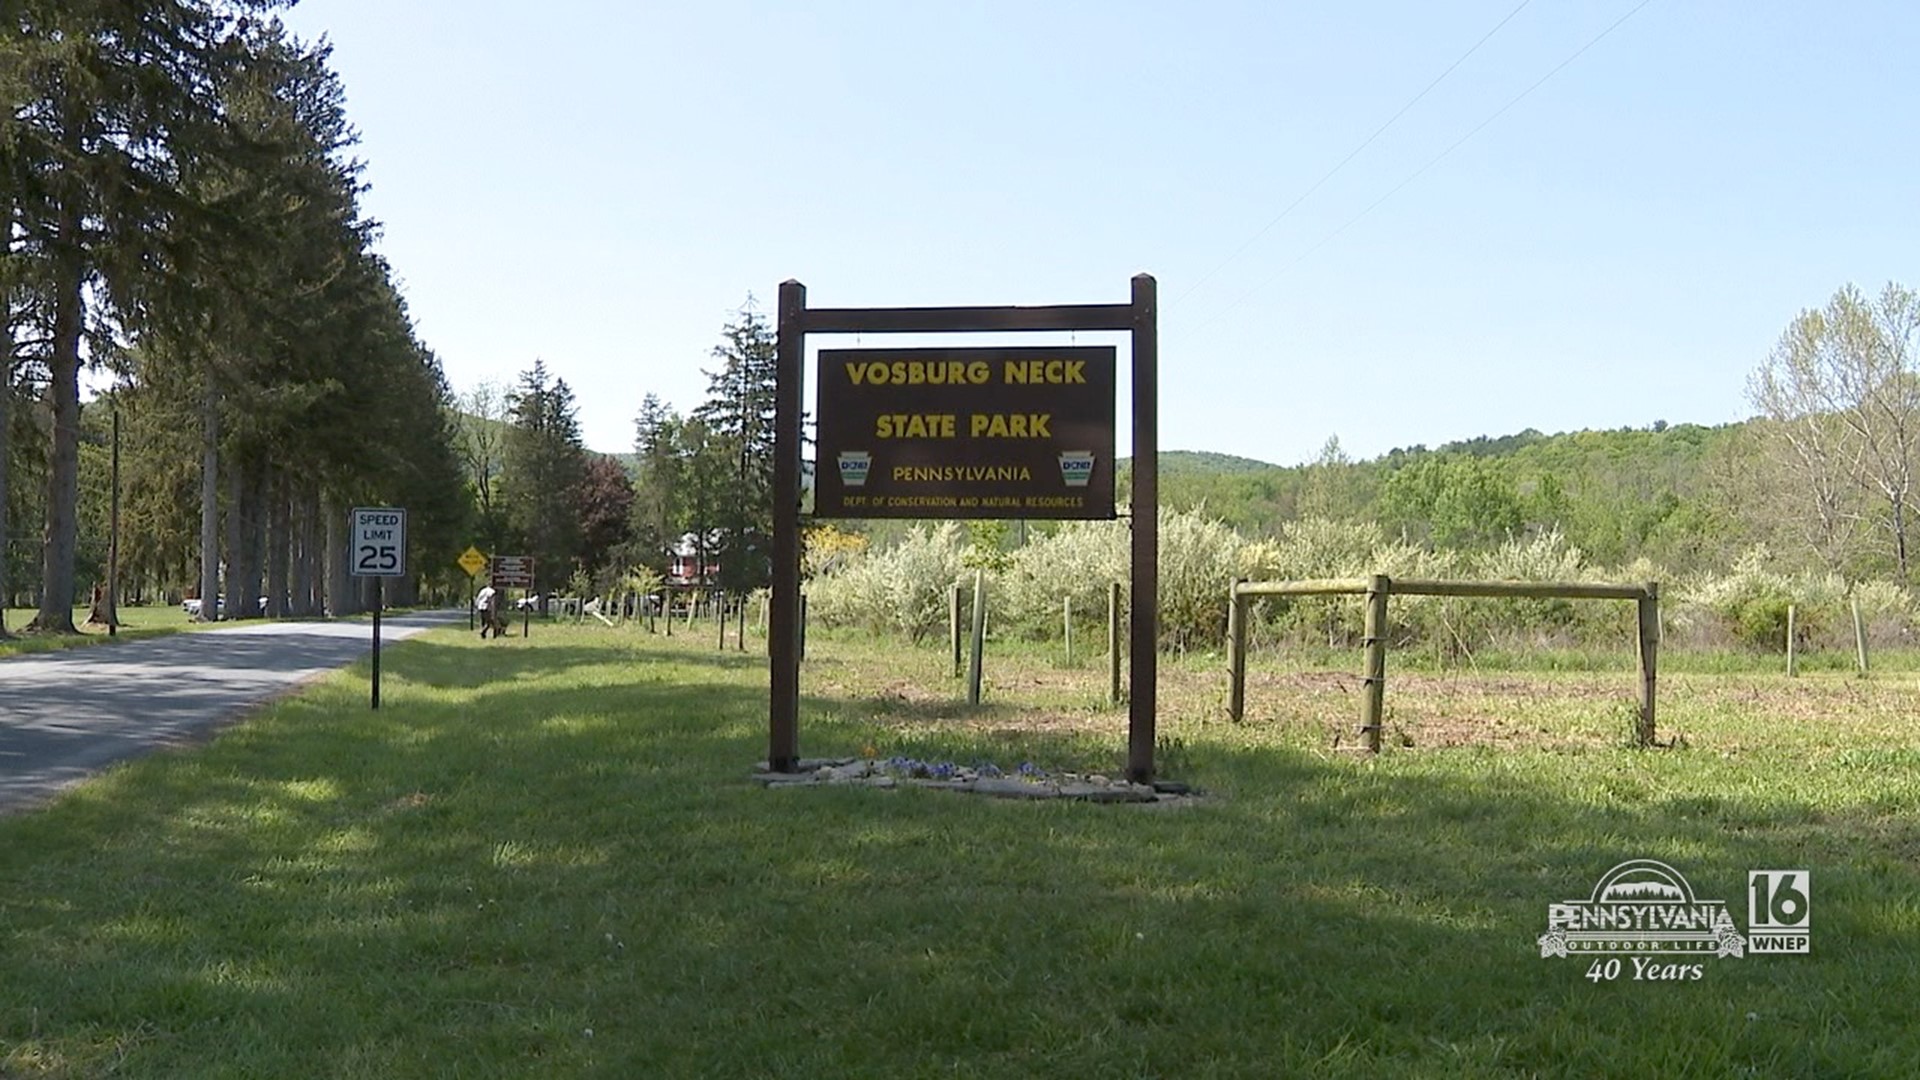 The newest state park in Pennsylvania.